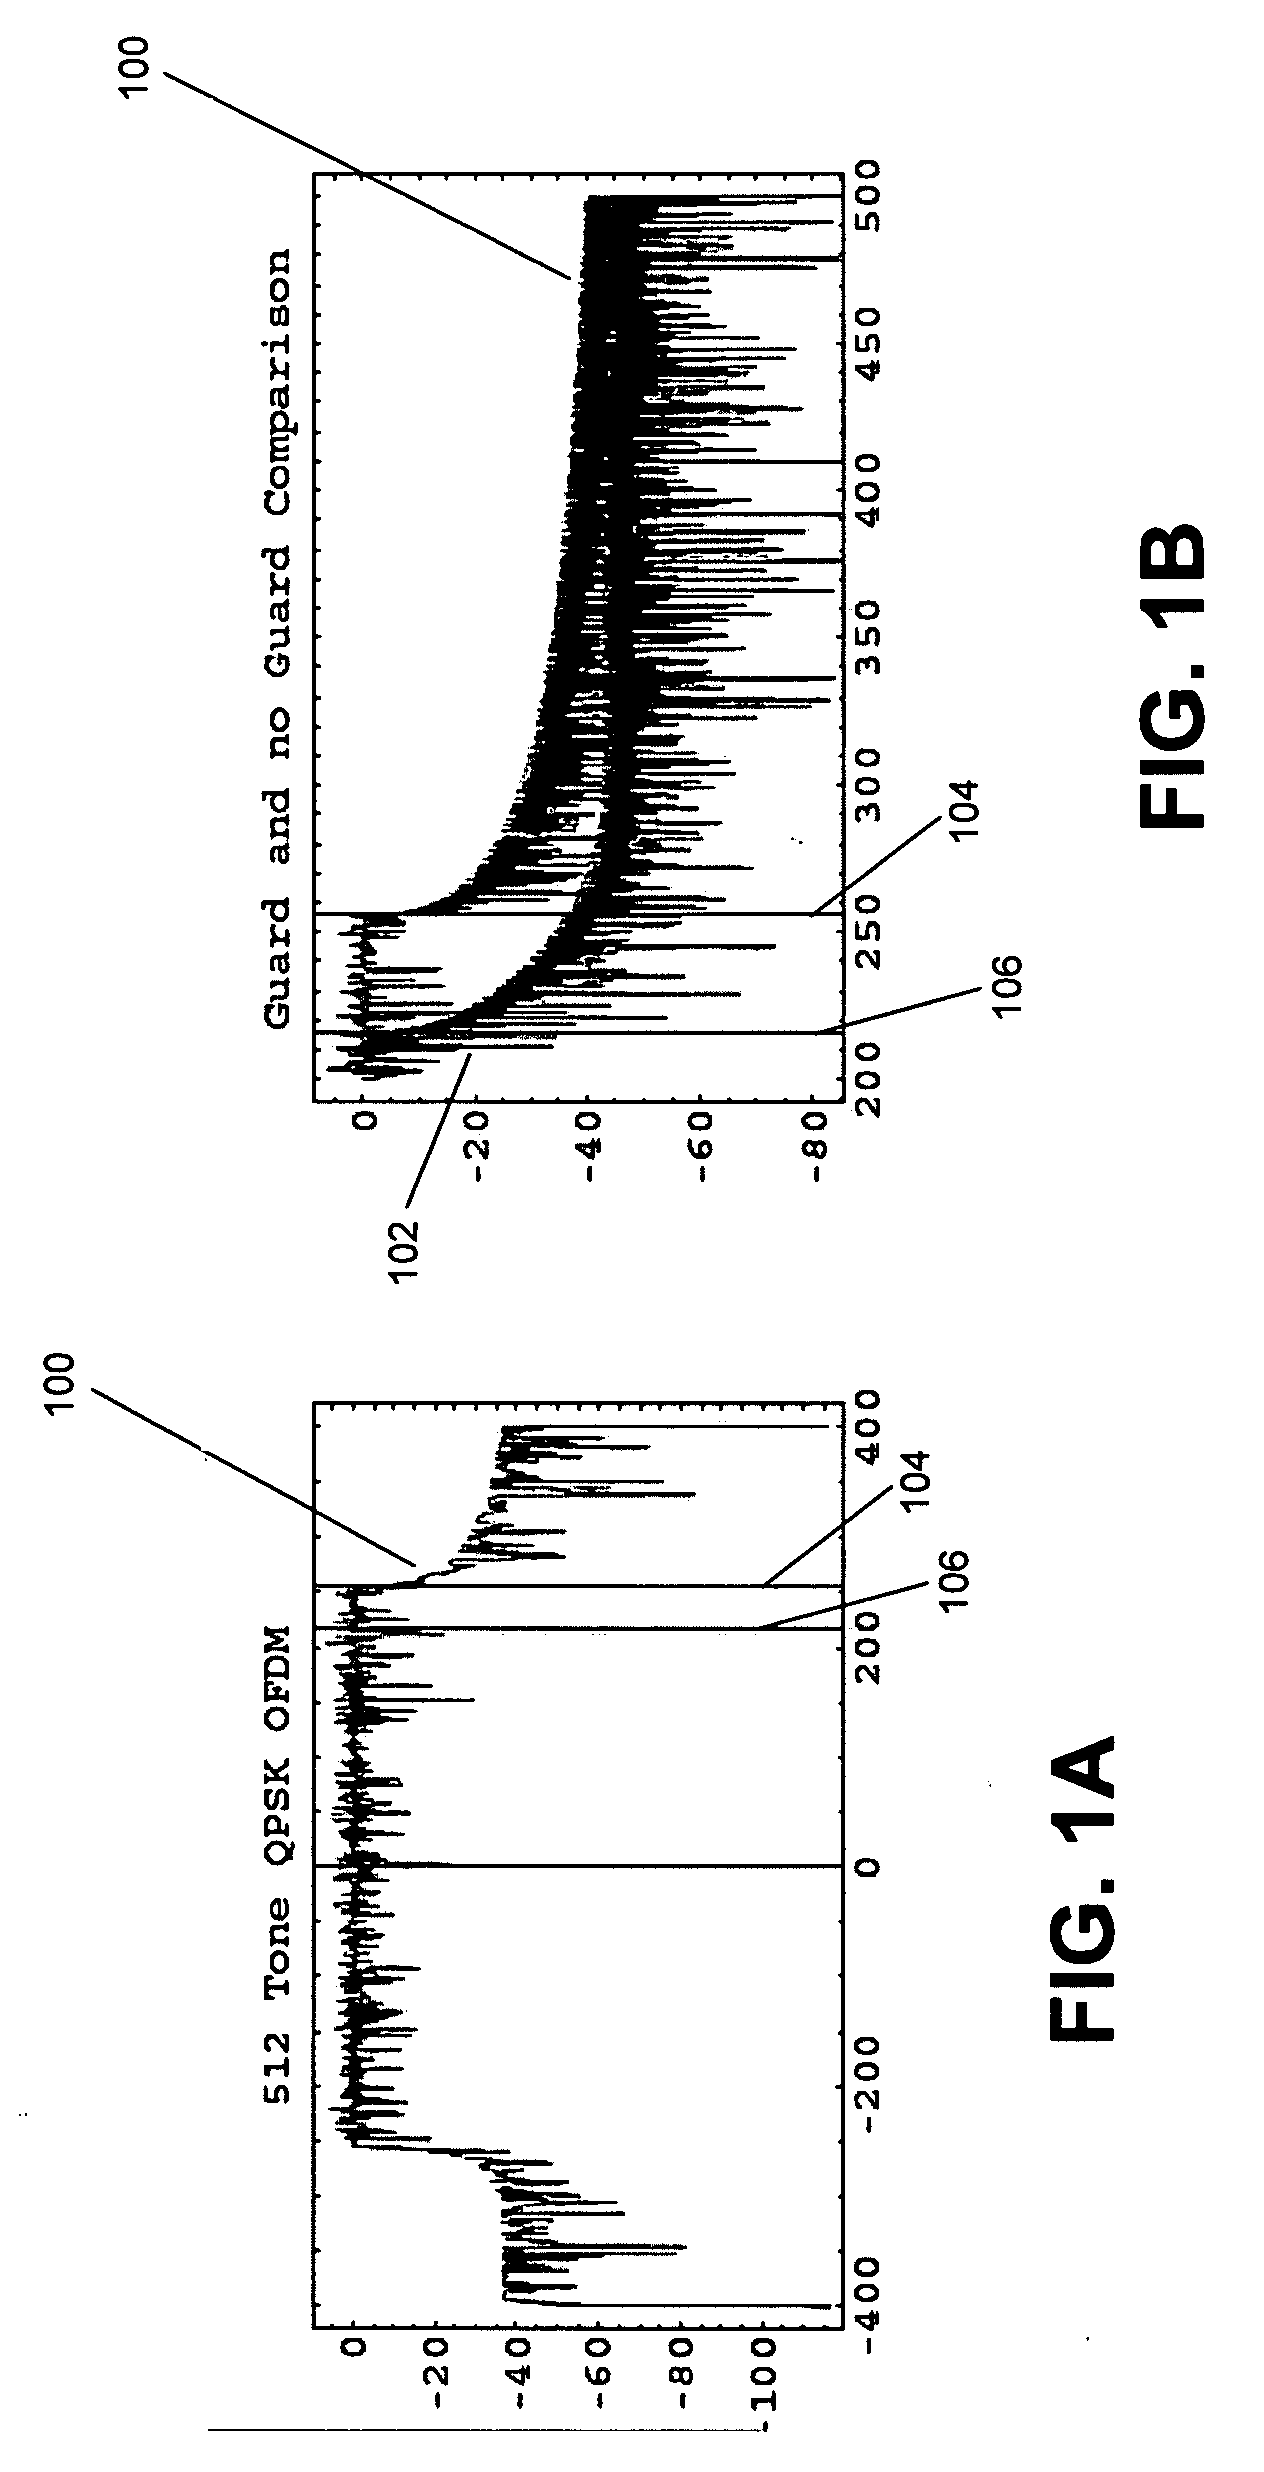 Method for suppression of OFDM energy spectral density for minimization of out of band emission or utilization of fractured spectrum